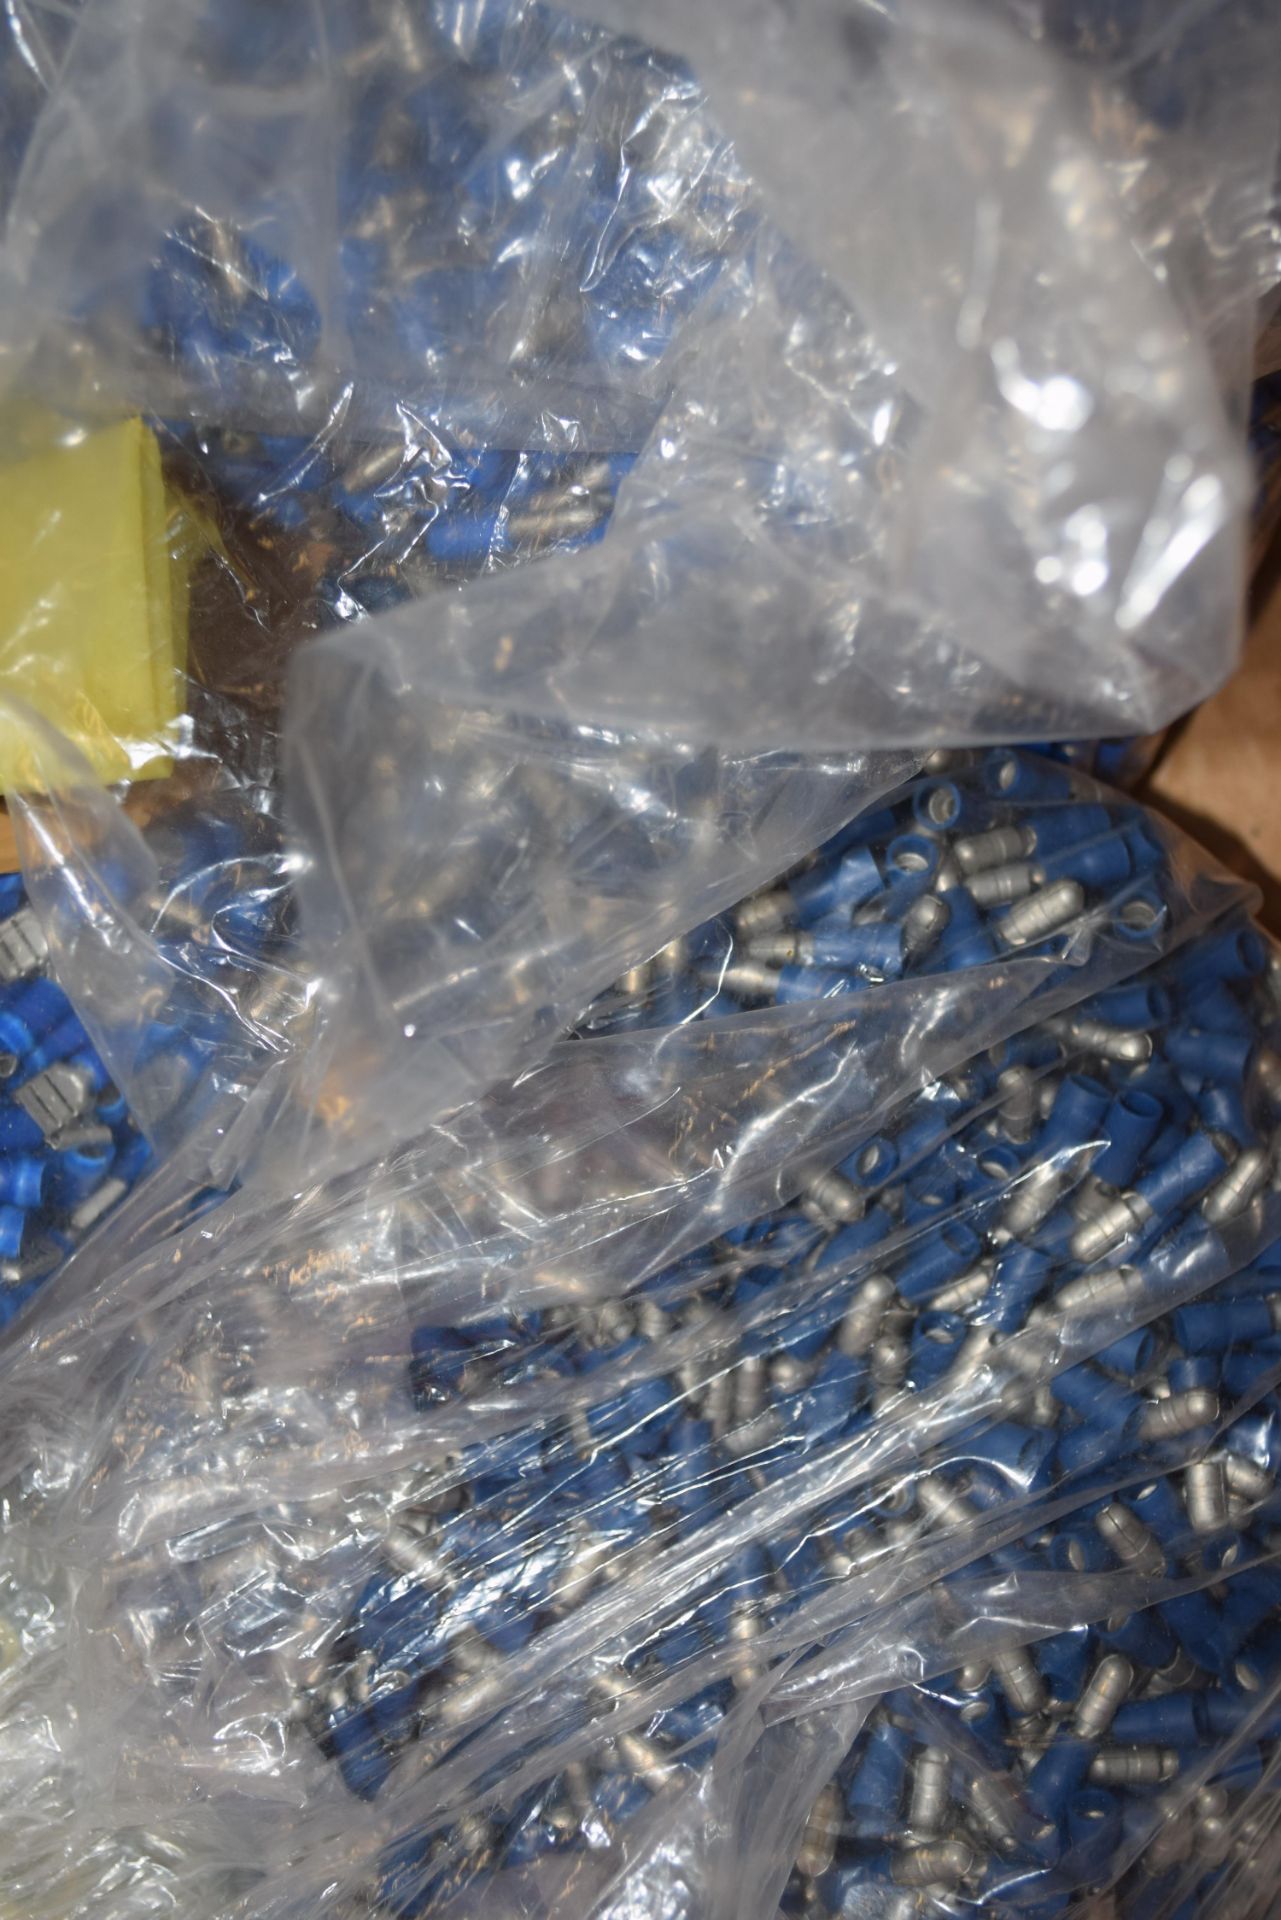 LARGE QTY OF BLUE TERMINAL CRIMP CONNECTORS OF VARYING SIZES - Image 2 of 3